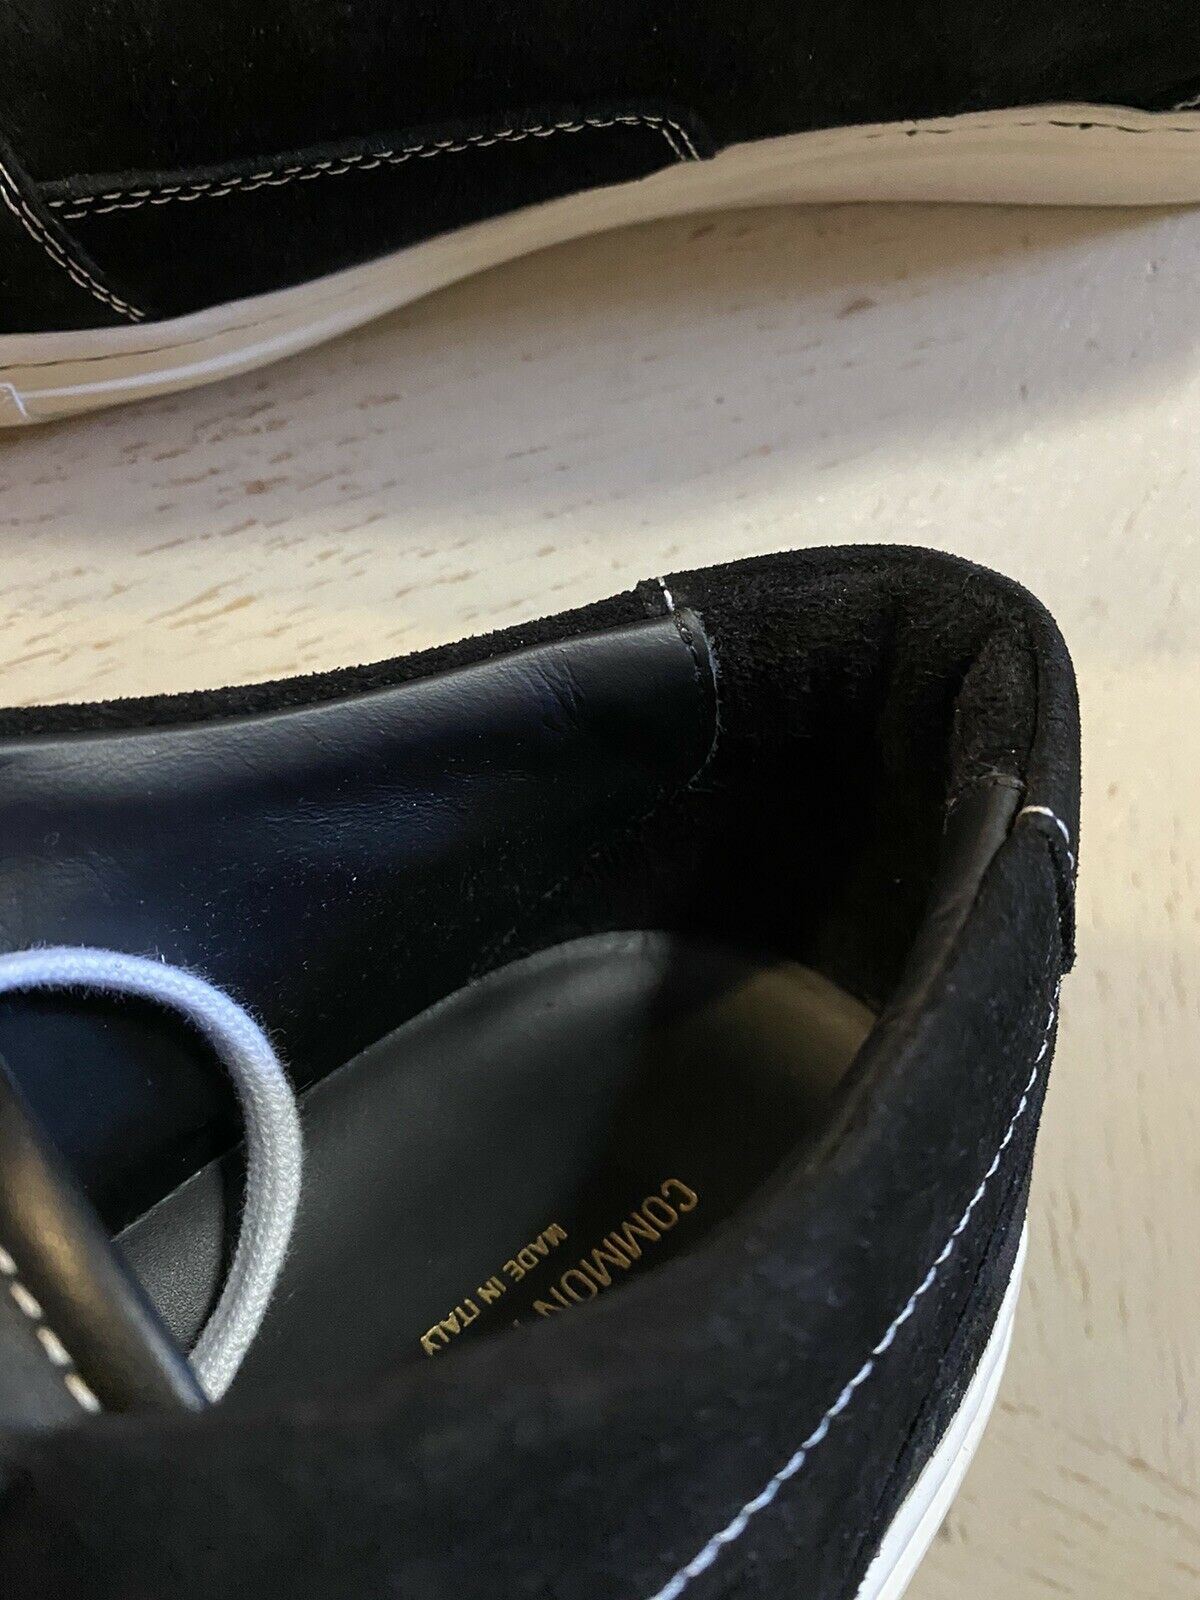 New $411 COMMON PROJECTS Men Sneakers Shoes Black 13 US/46 Eu Italy